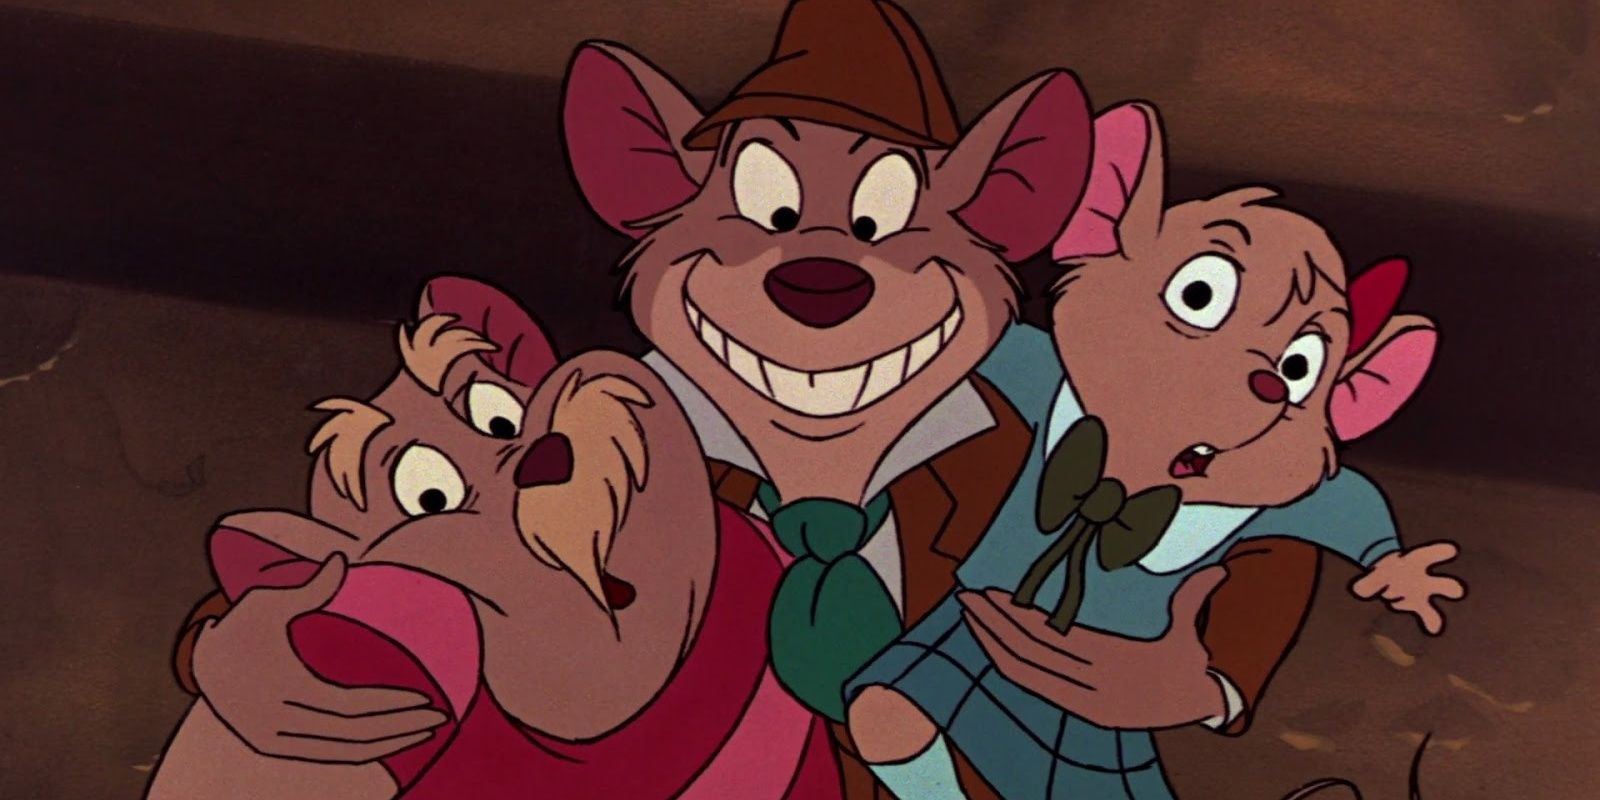 Basil hugging Dawson and Olivia enthusiastically in The Great Mouse Detective